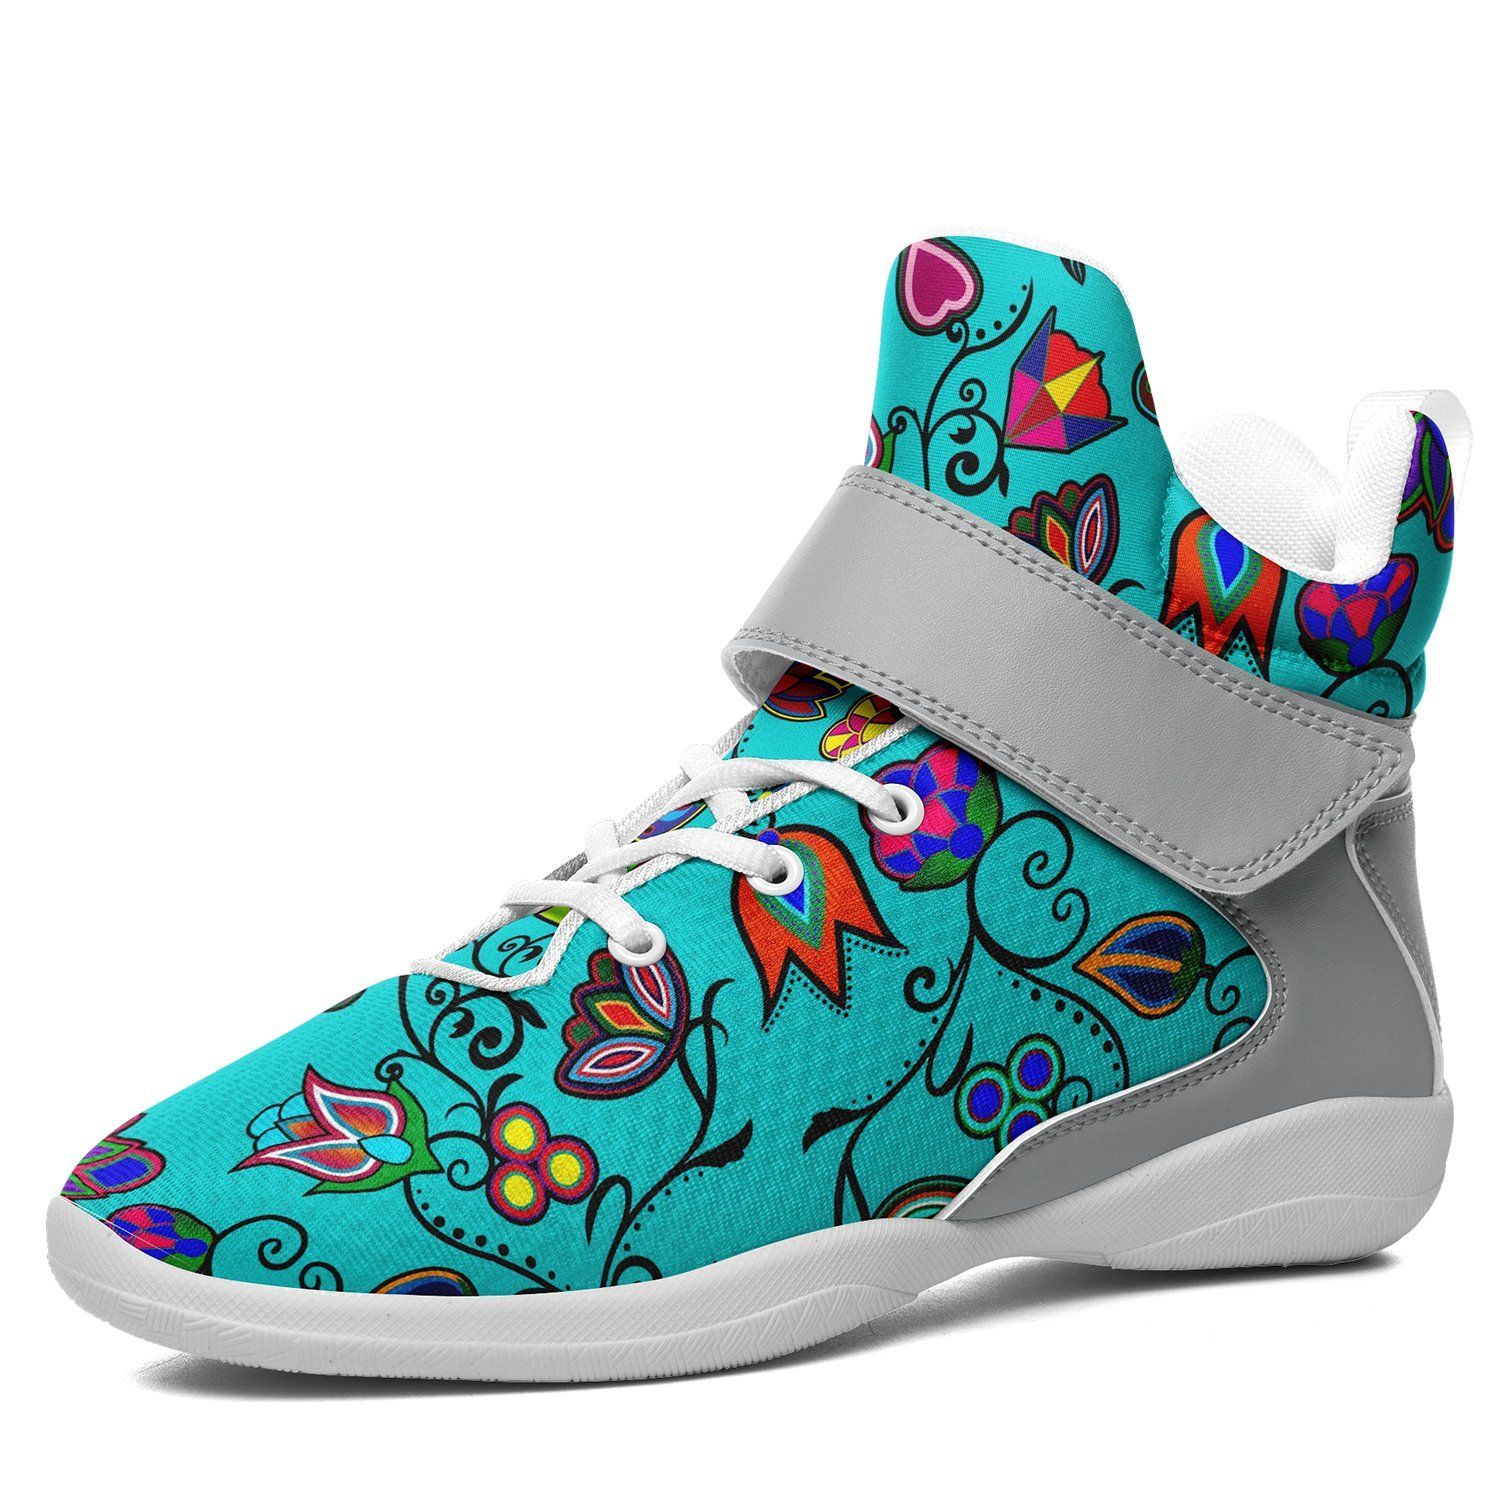 Indigenous Paisley Sky Ipottaa Basketball / Sport High Top Shoes - White Sole 49 Dzine US Women 8.5 / US Men 7 / EUR 40 White Sole with Gray Strap 